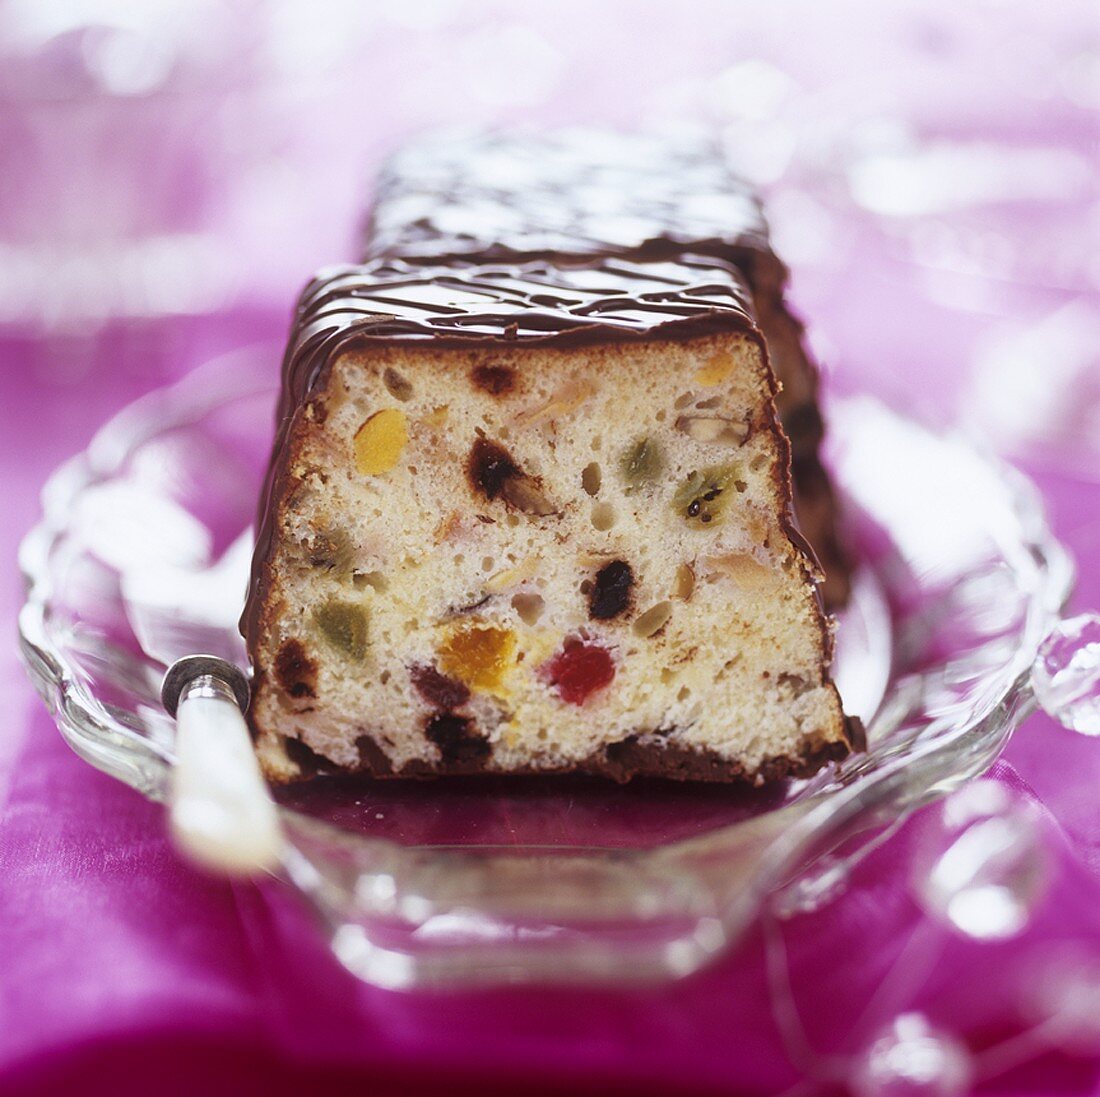 Fruit cake with chocolate icing